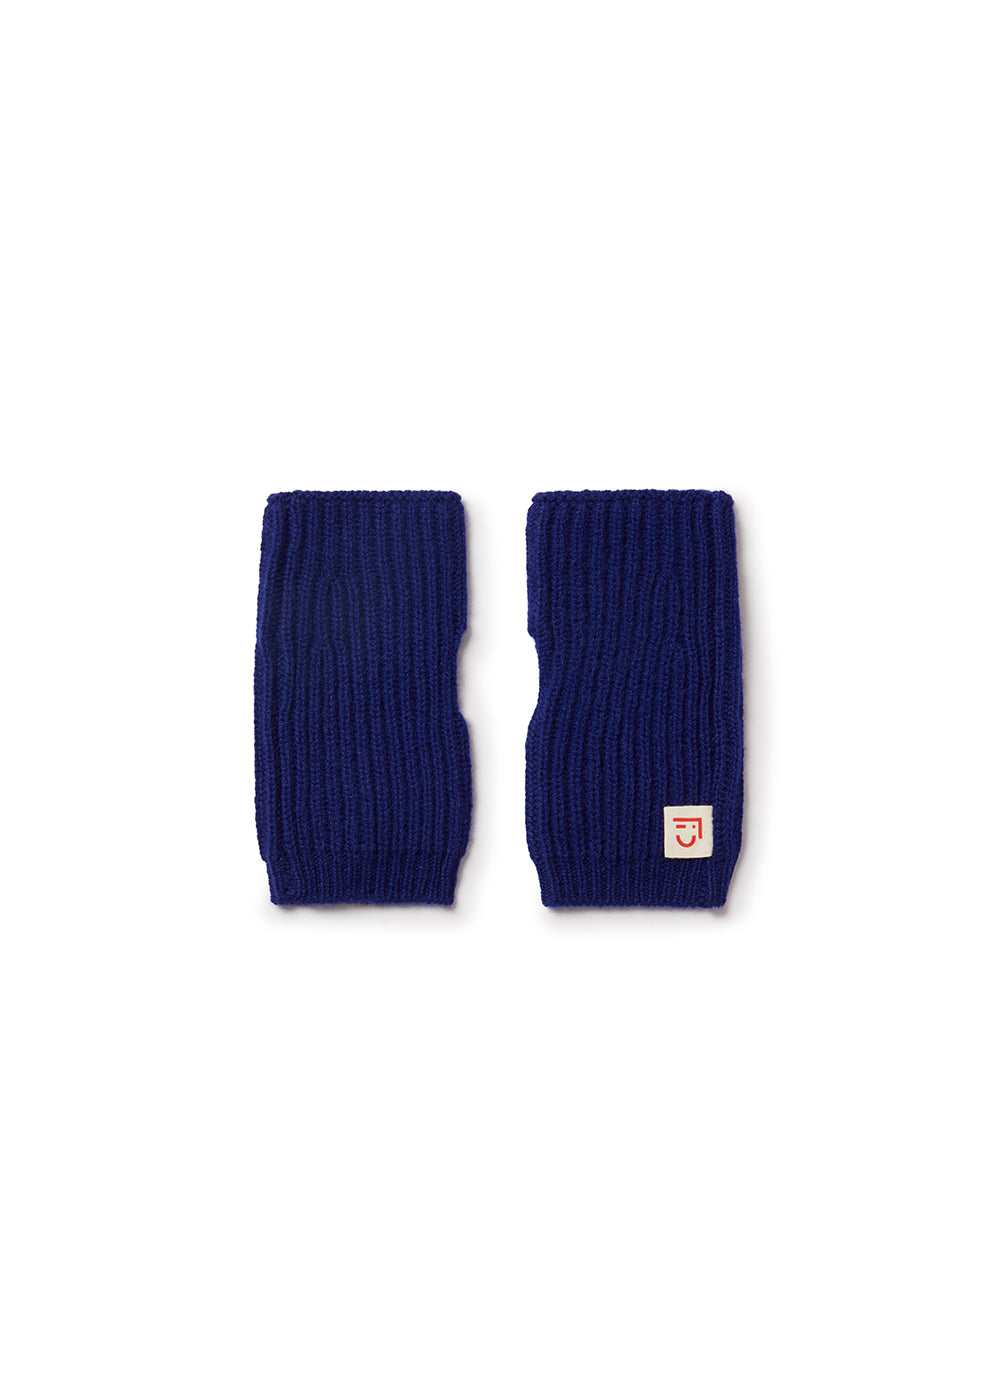 Laax Fingerless Mittens - One size / French Navy